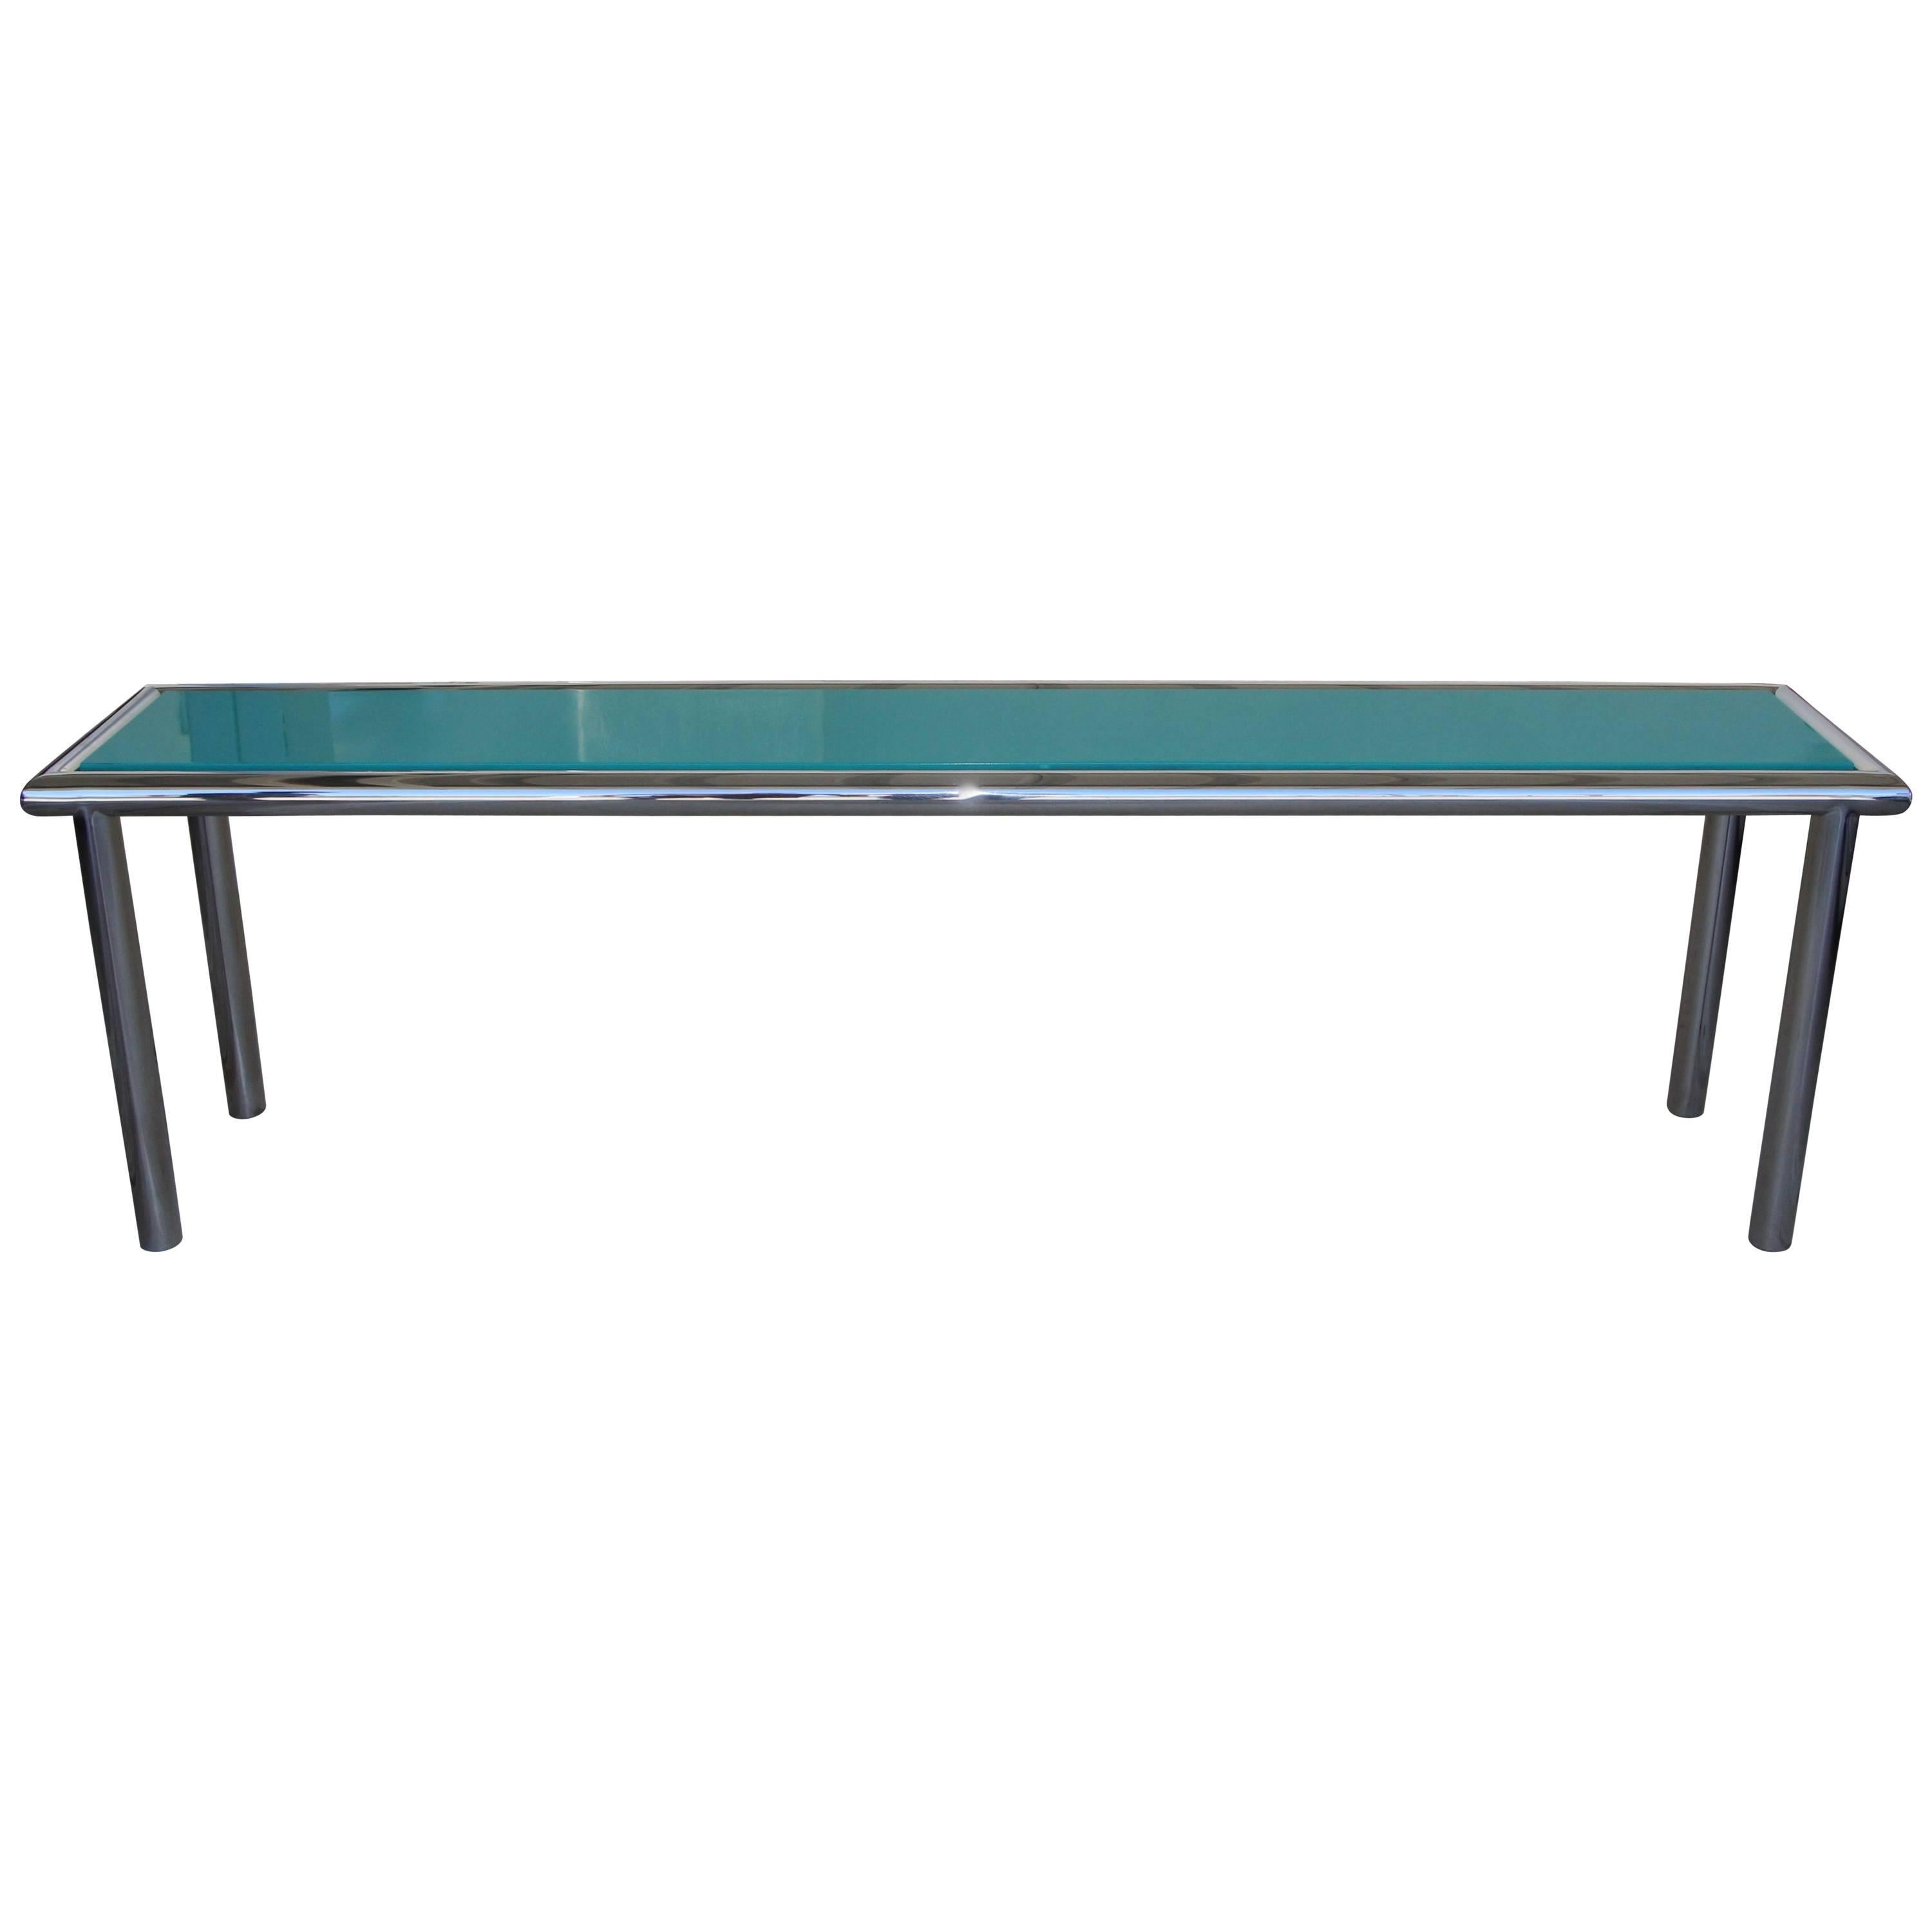 Chrome and Lacquer Long Sofa Table Console